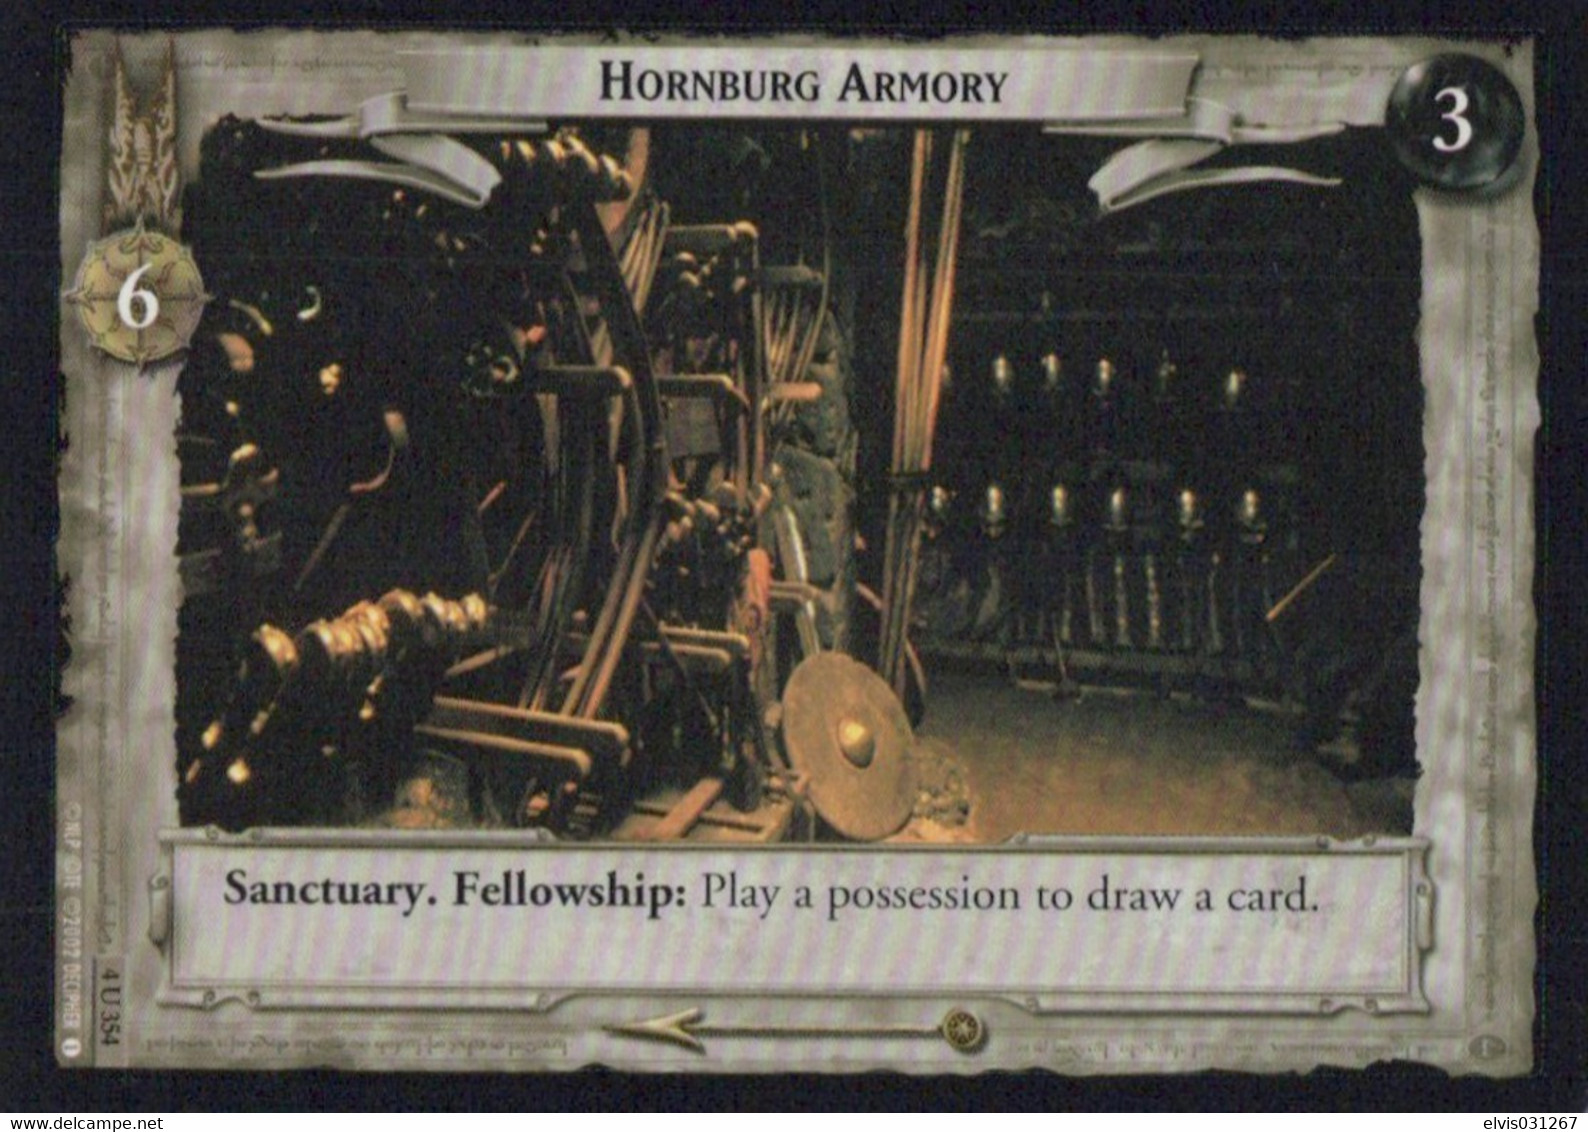 Vintage The Lord Of The Rings: #3-6 Hornburg Armory - EN - 2001-2004 - Mint Condition - Trading Card Game - Il Signore Degli Anelli